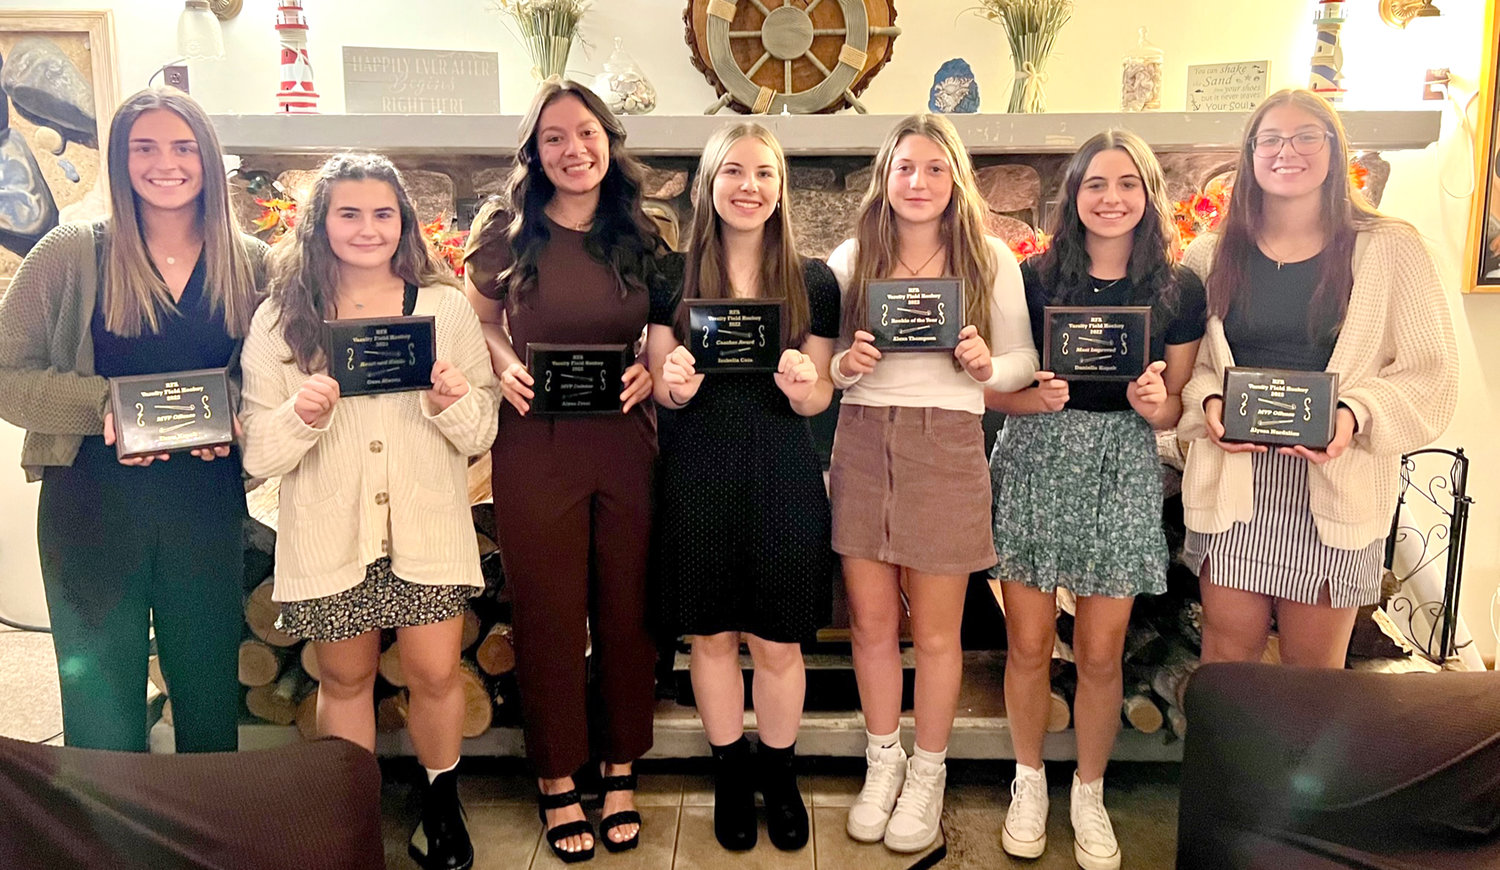 FIELD HOCKEY AWARDS — The Rome Free Academy field hockey team held its team banquet and handed out awards for the season. From left: Drew Kopek, co-offensive player of the year; Cara Mecca, heart and hustle award; Alyce Frost, defensive player of the year; Isabella Cain, coaches award; Alexa Thompson, rookie of the year; Dani Kopek, most improved player; Alyssa Nardslico, co-offensive player of the year. The Black Knights were 14-4 this season.